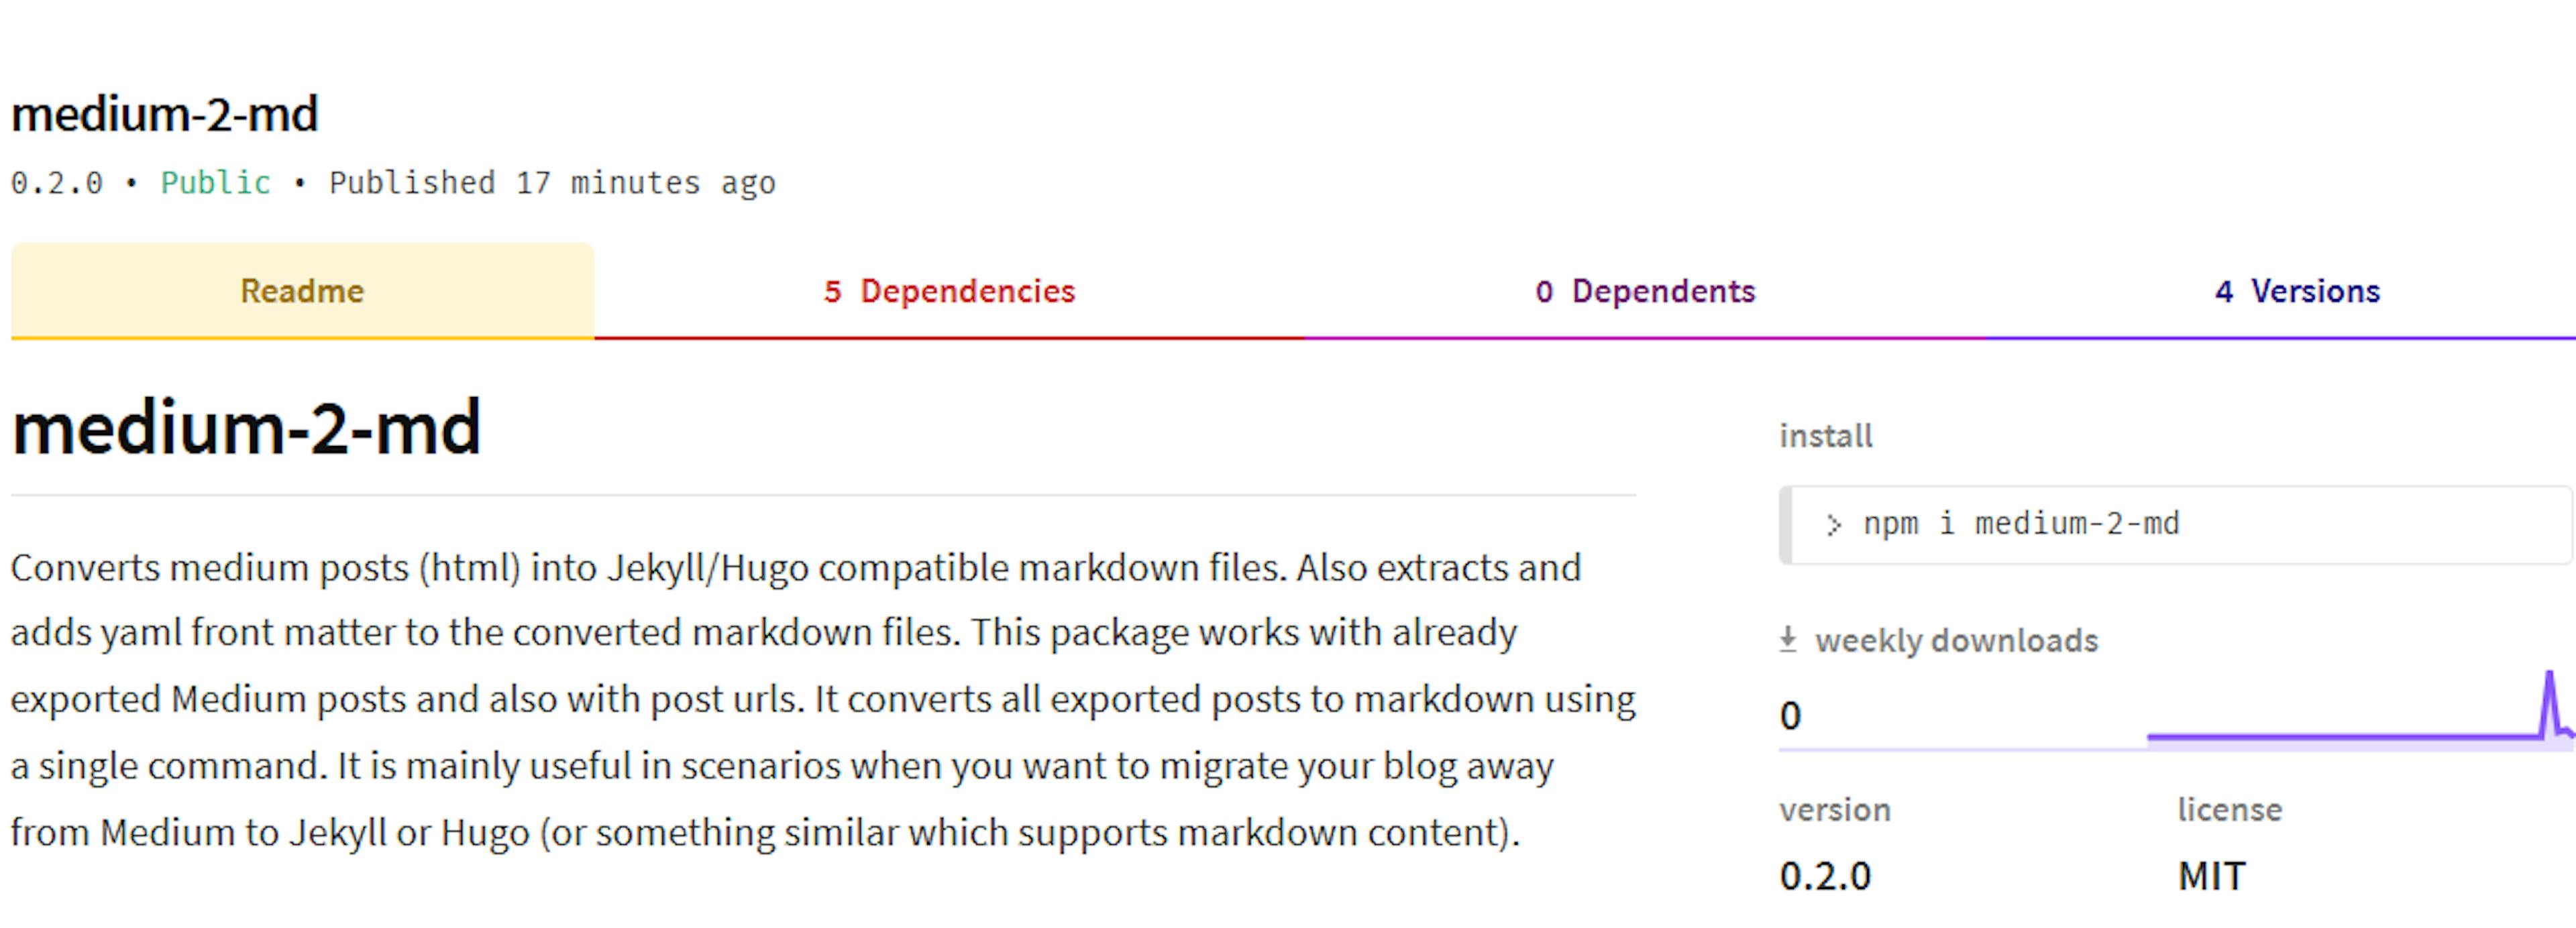 featured image - medium-2-md: Convert Medium posts to markdown with front matter